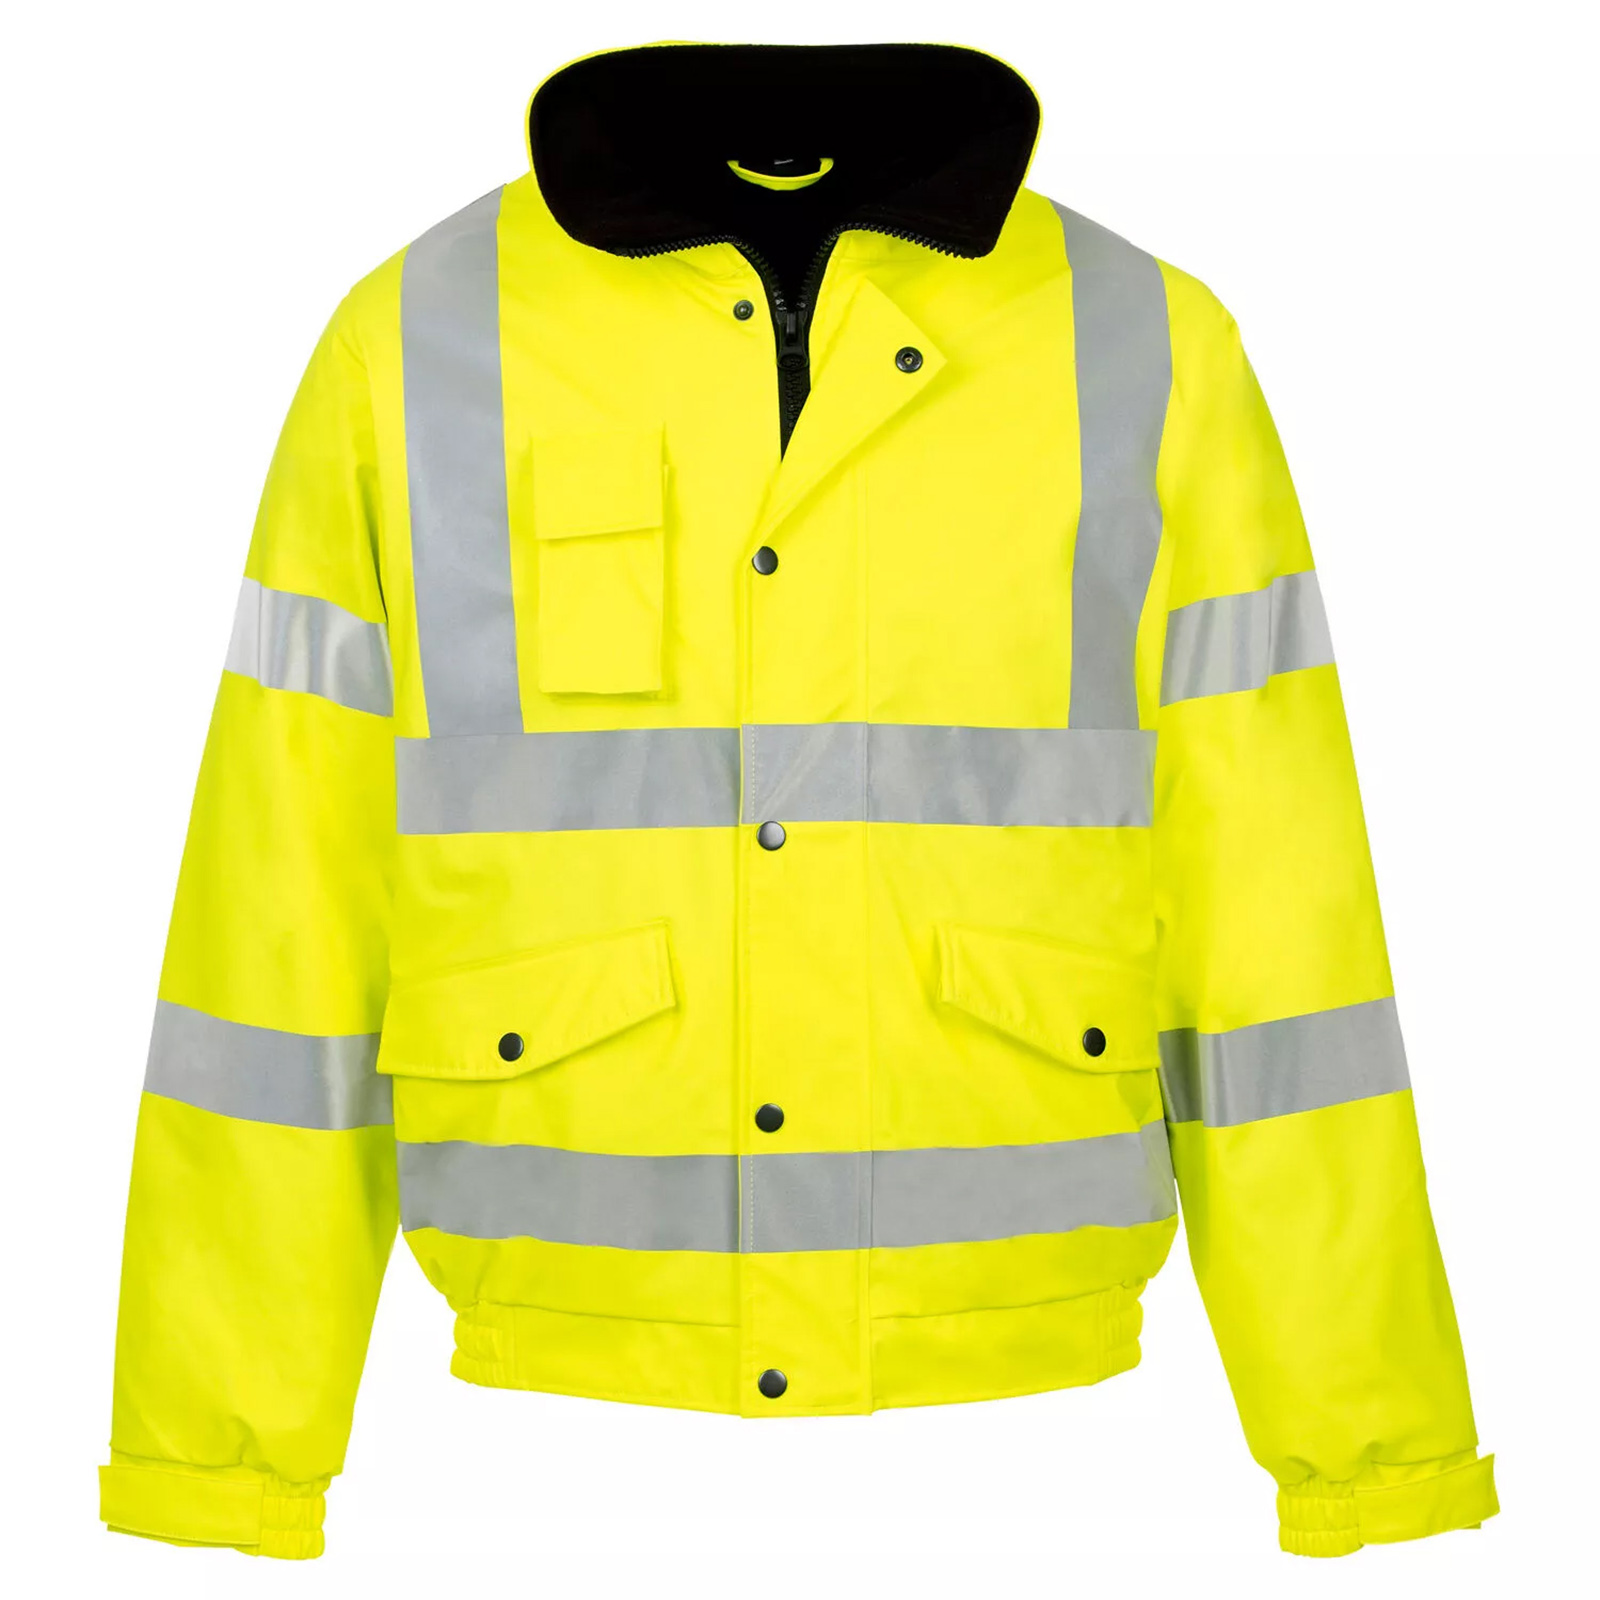 Constraction Safety Jacket